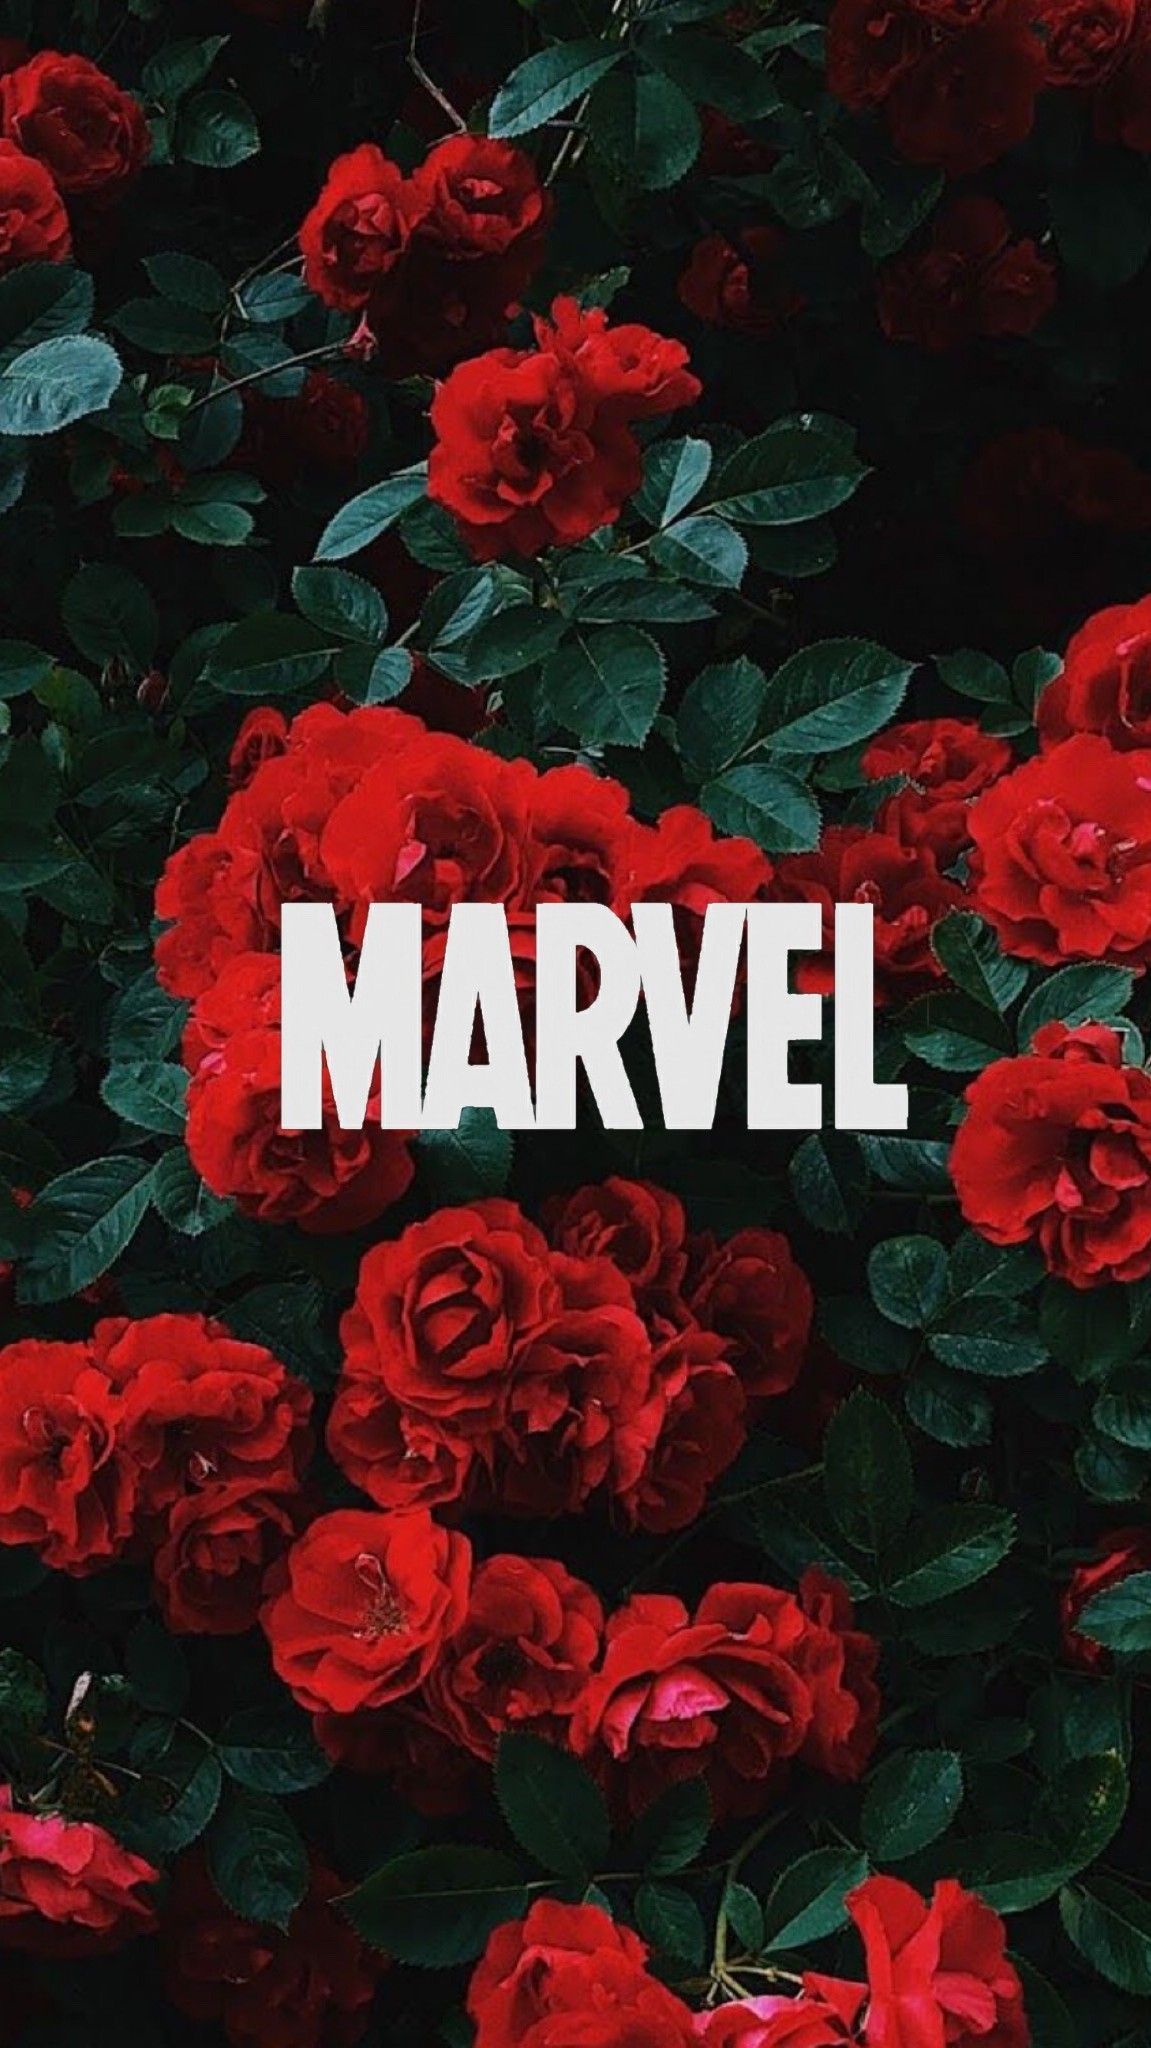 Marvel Aesthetic Wallpapers - Wallpaper Cave